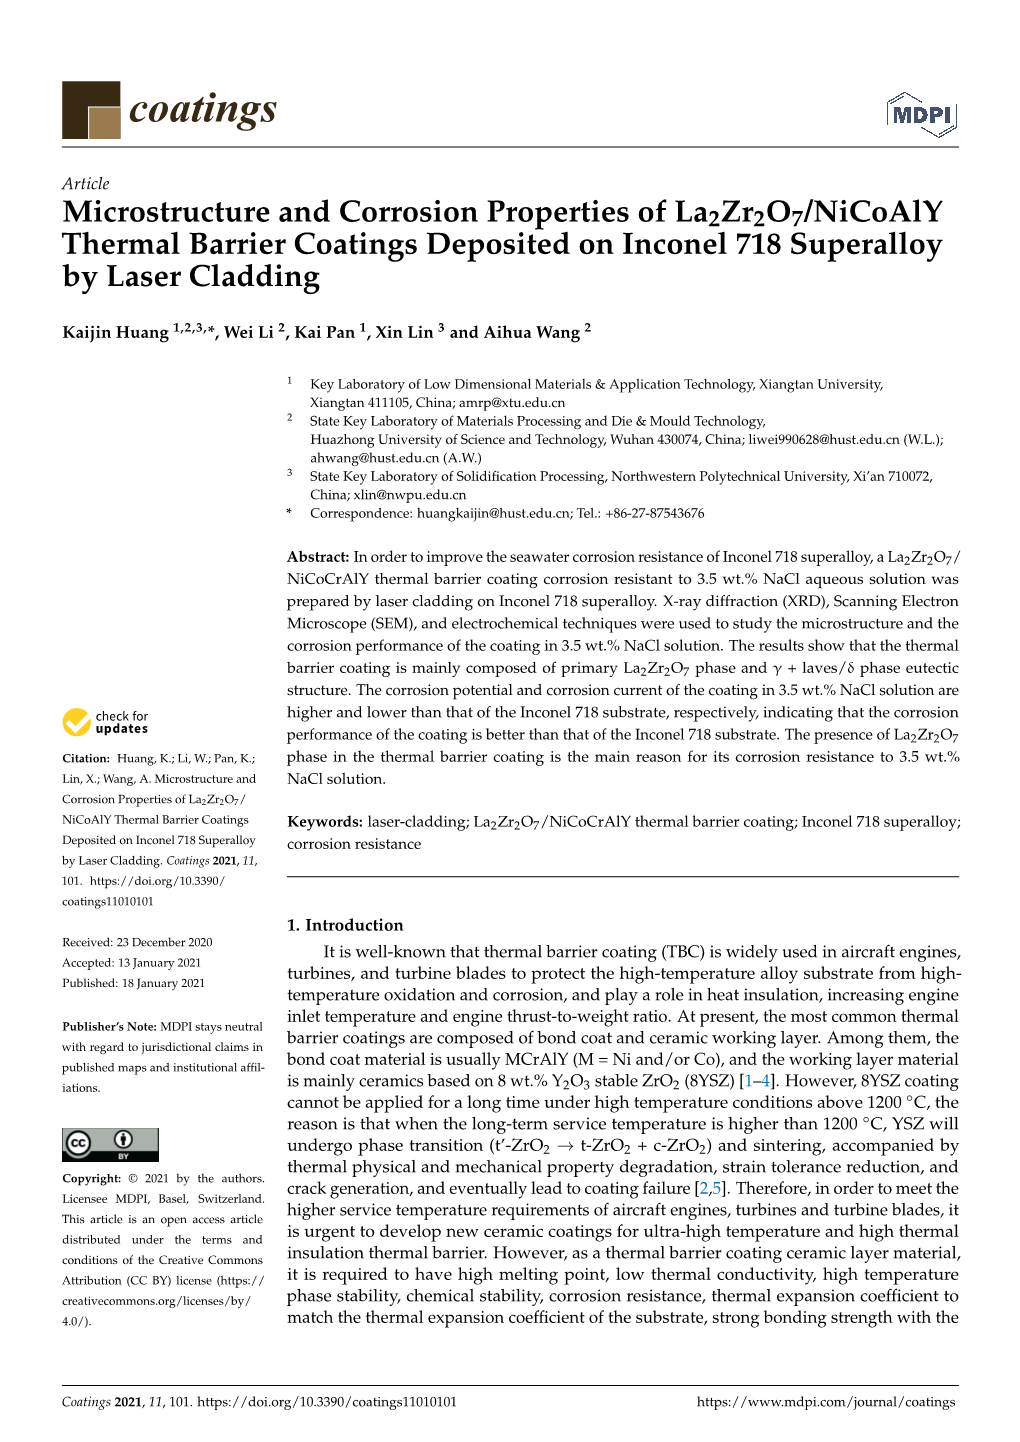 Microstructure and Corrosion Properties of La2zr2o7/Nicoaly Thermal Barrier Coatings Deposited on Inconel 718 Superalloy by Laser Cladding